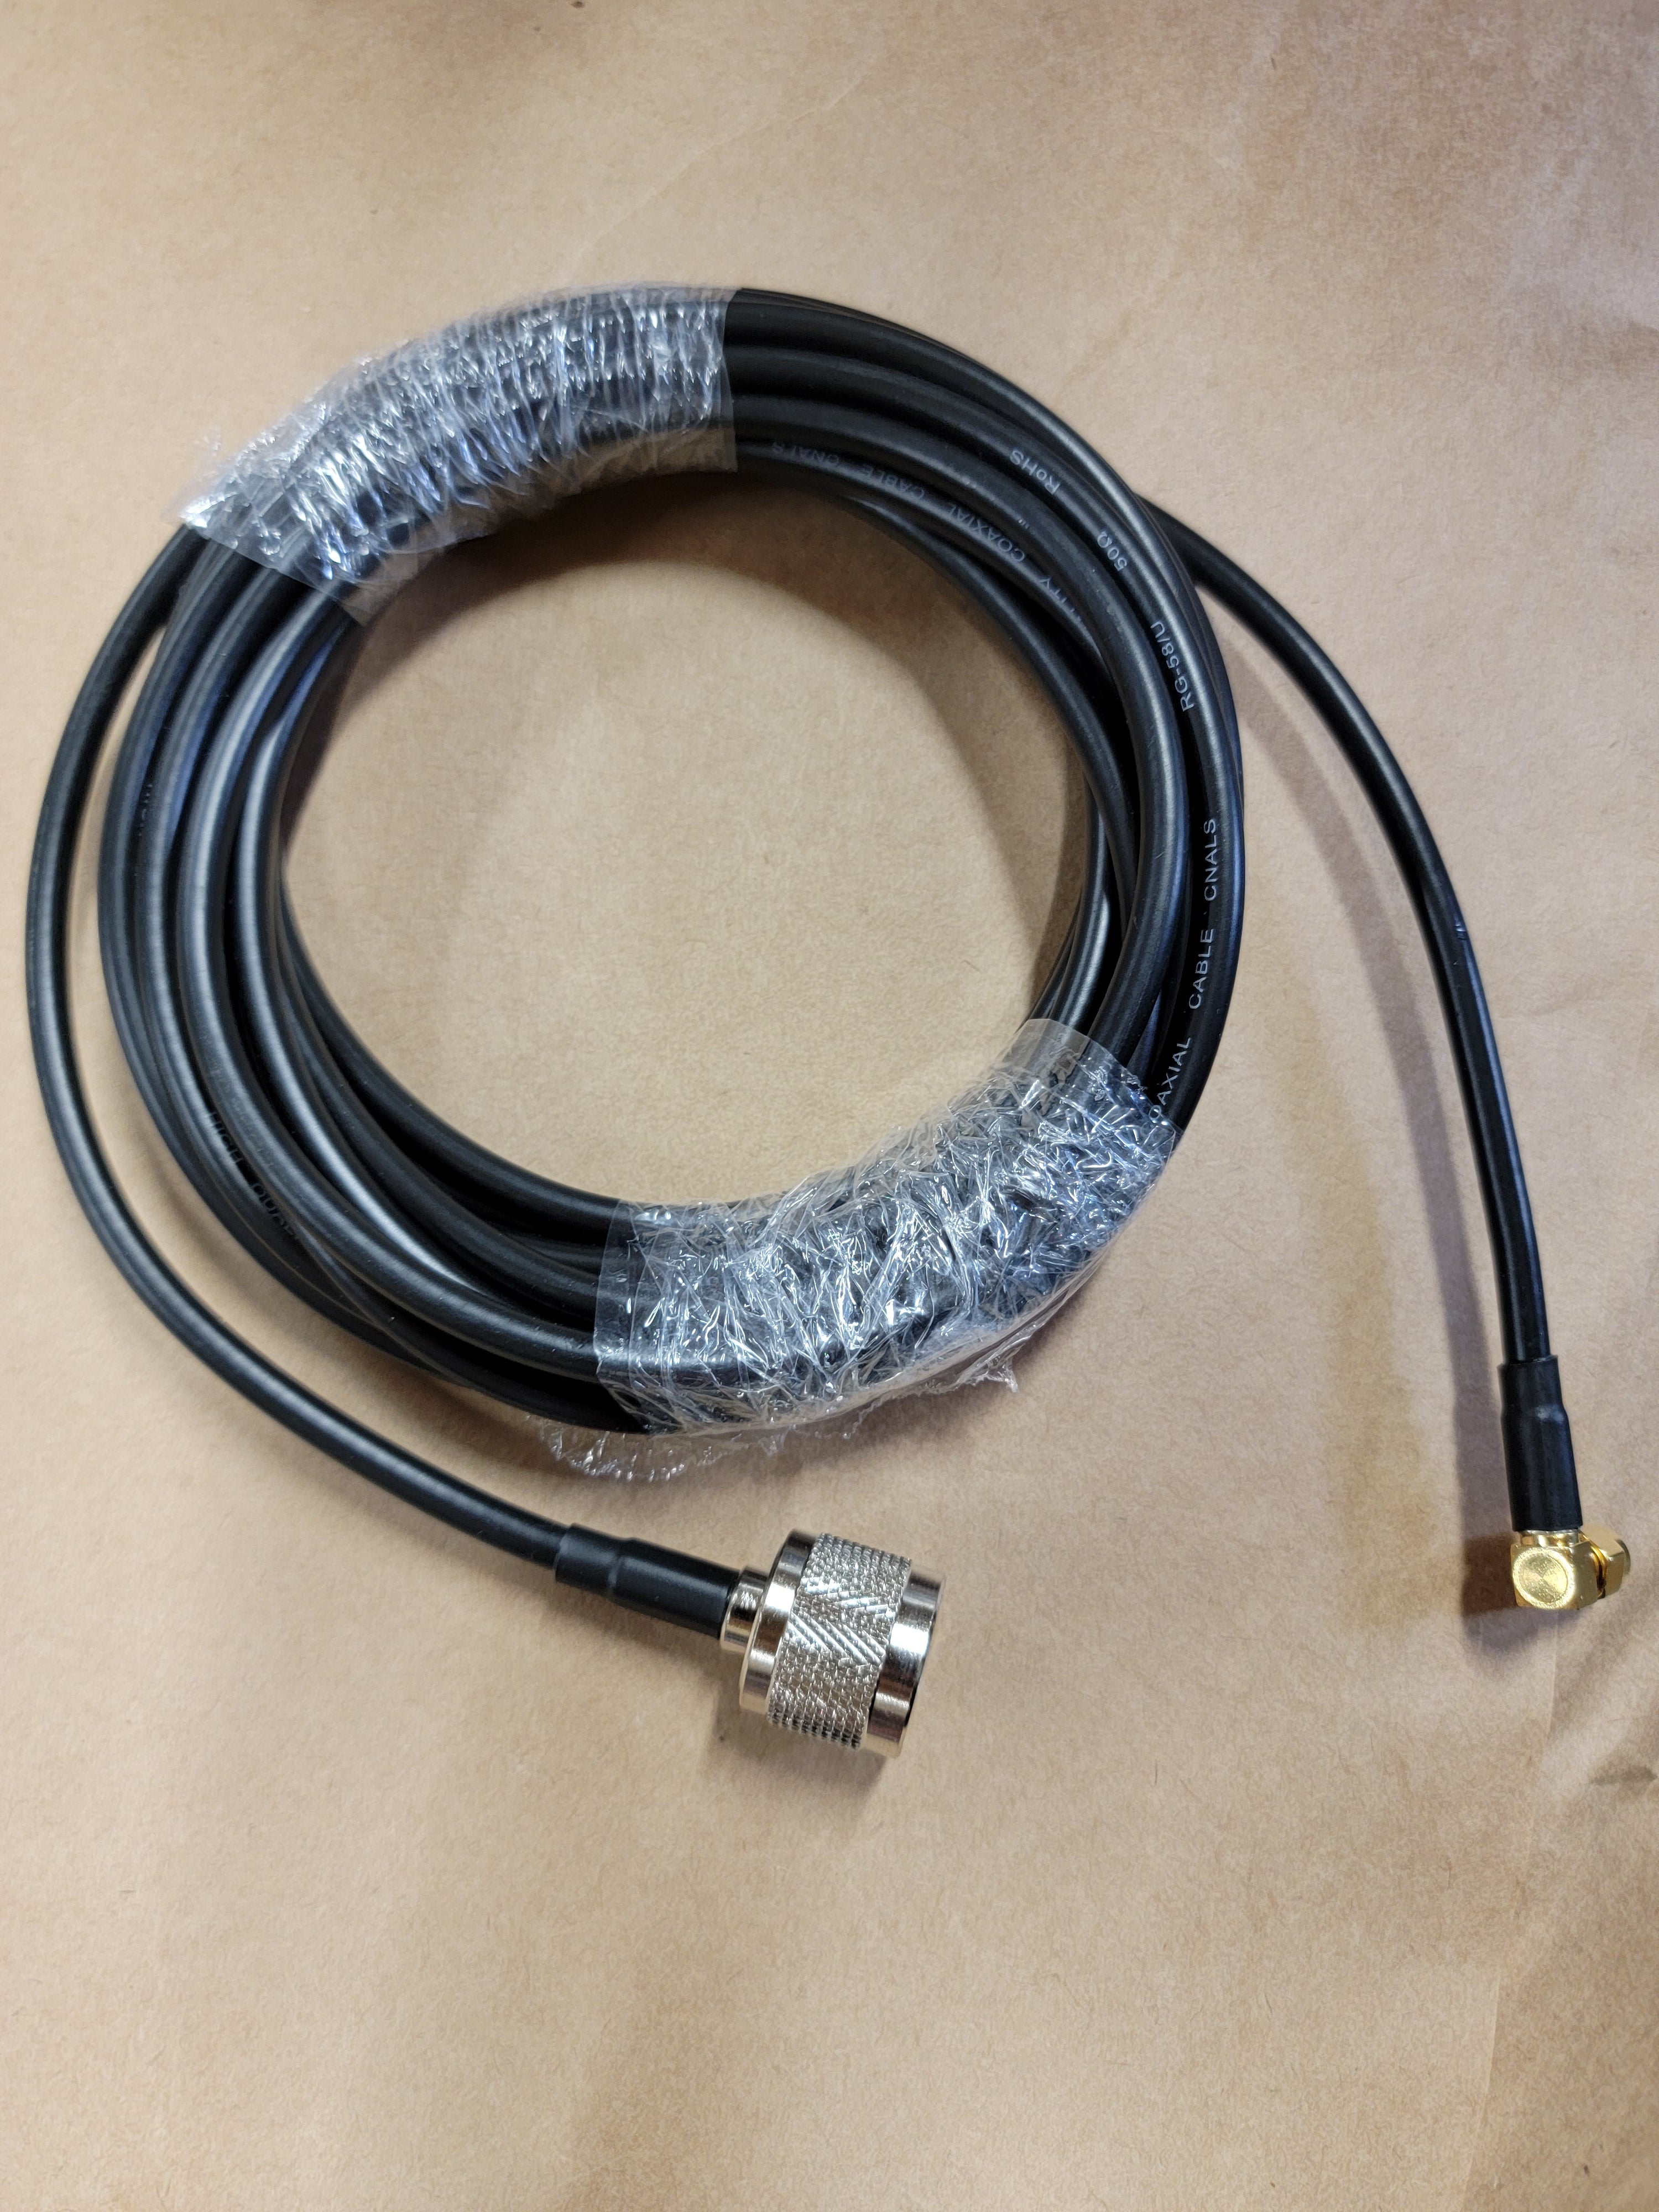 20' Booster Antenna Replacement Ultra Low Loss Cable